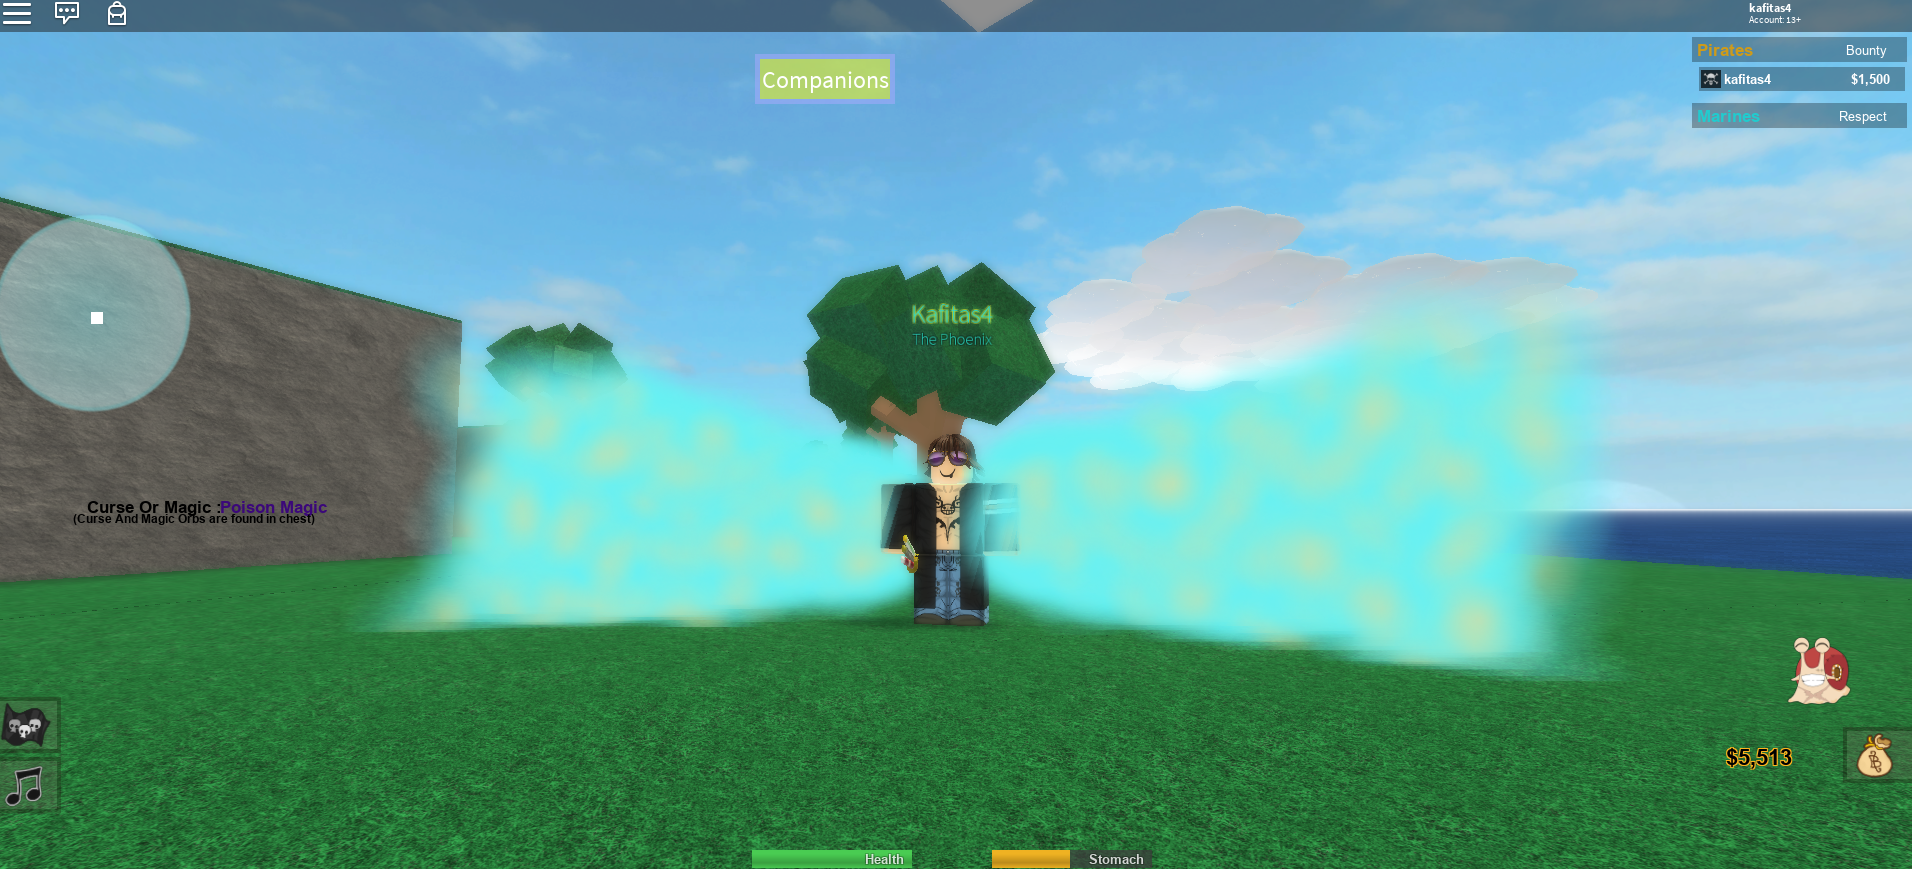 swearing in roblox copy and paste